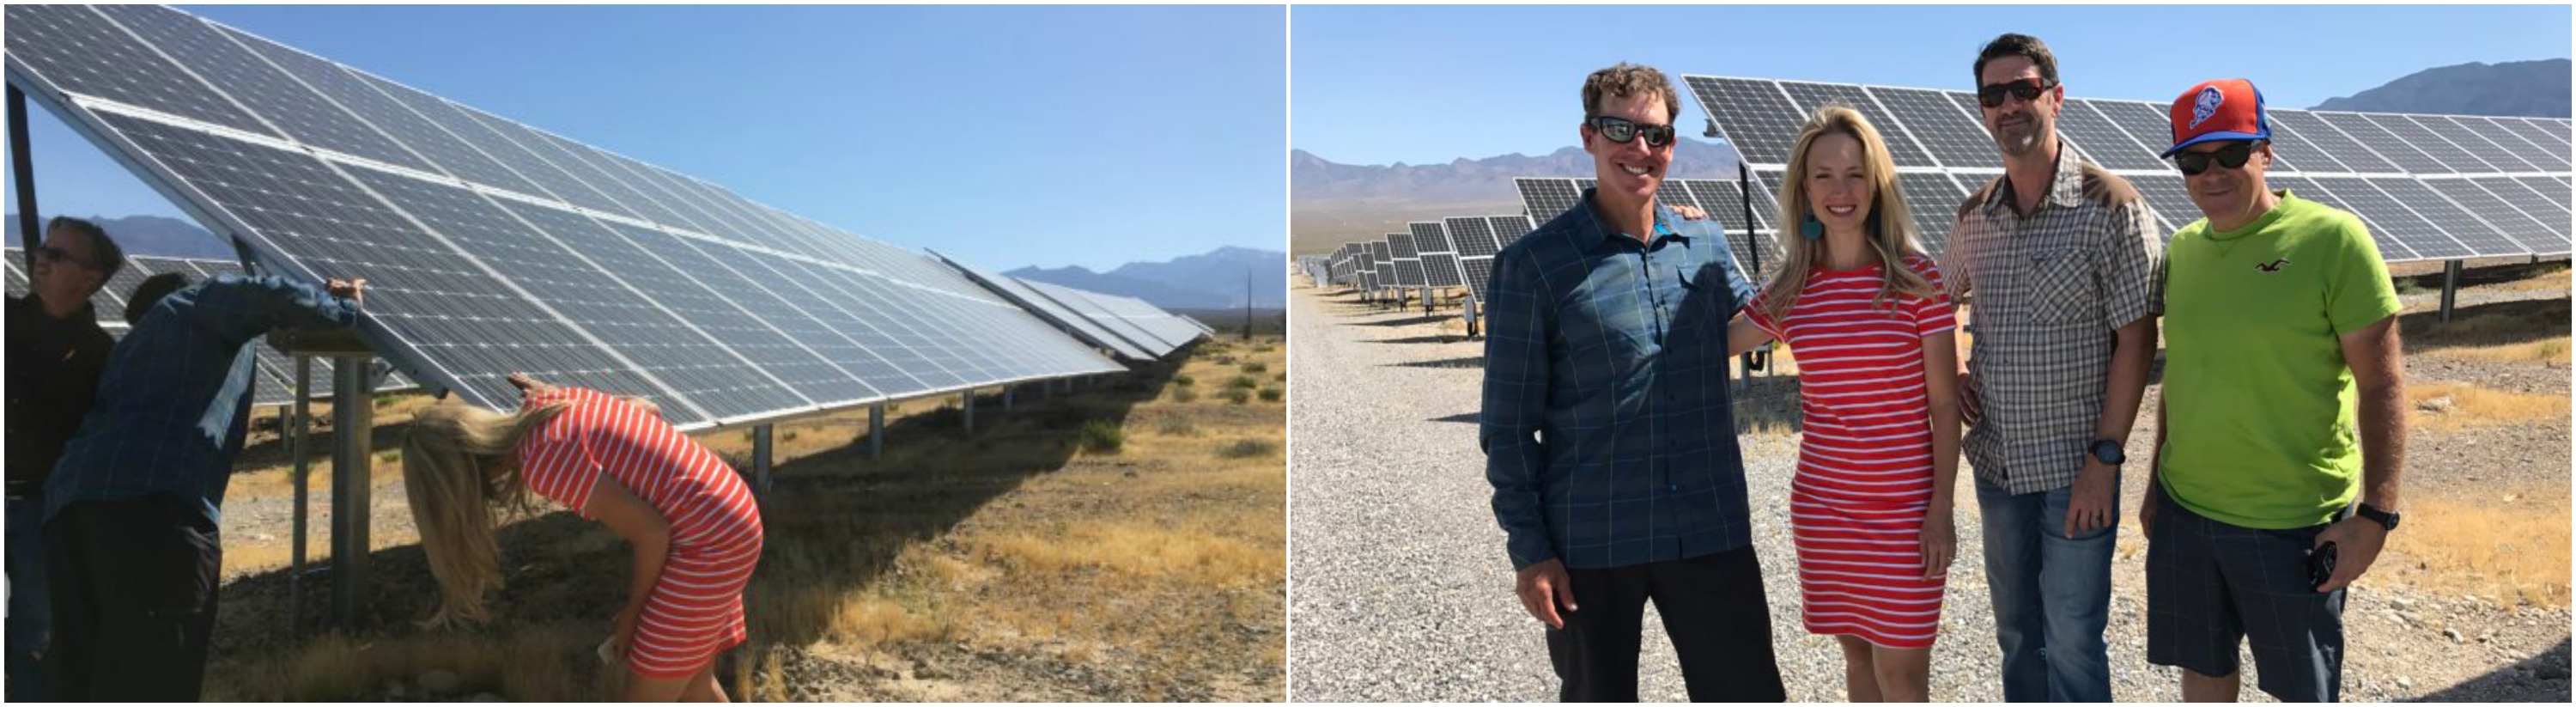 Fisher for Nevada team at solar facility in Pahrump